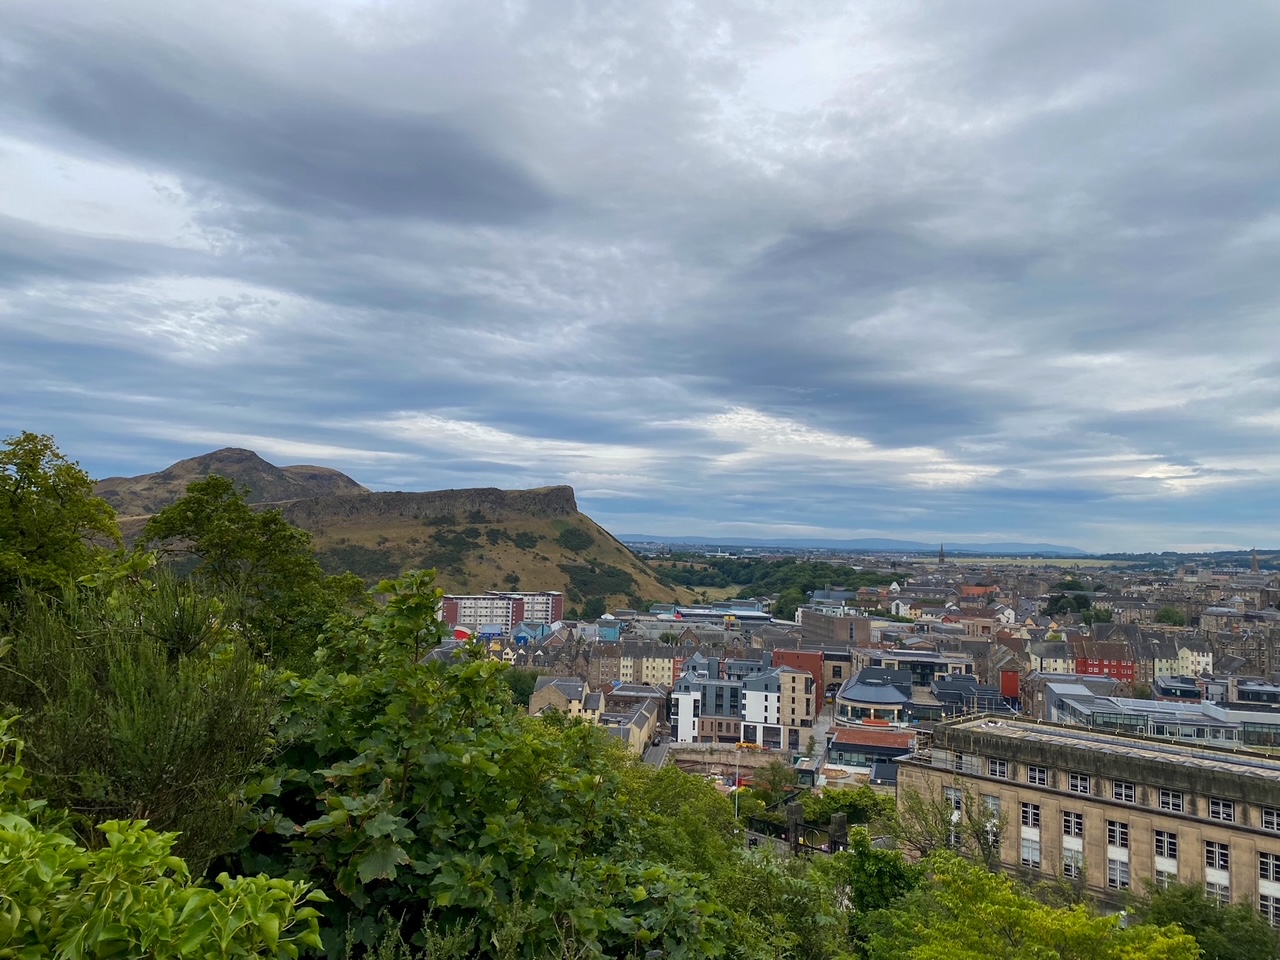 view of Arthur's Seat from Calton Hill